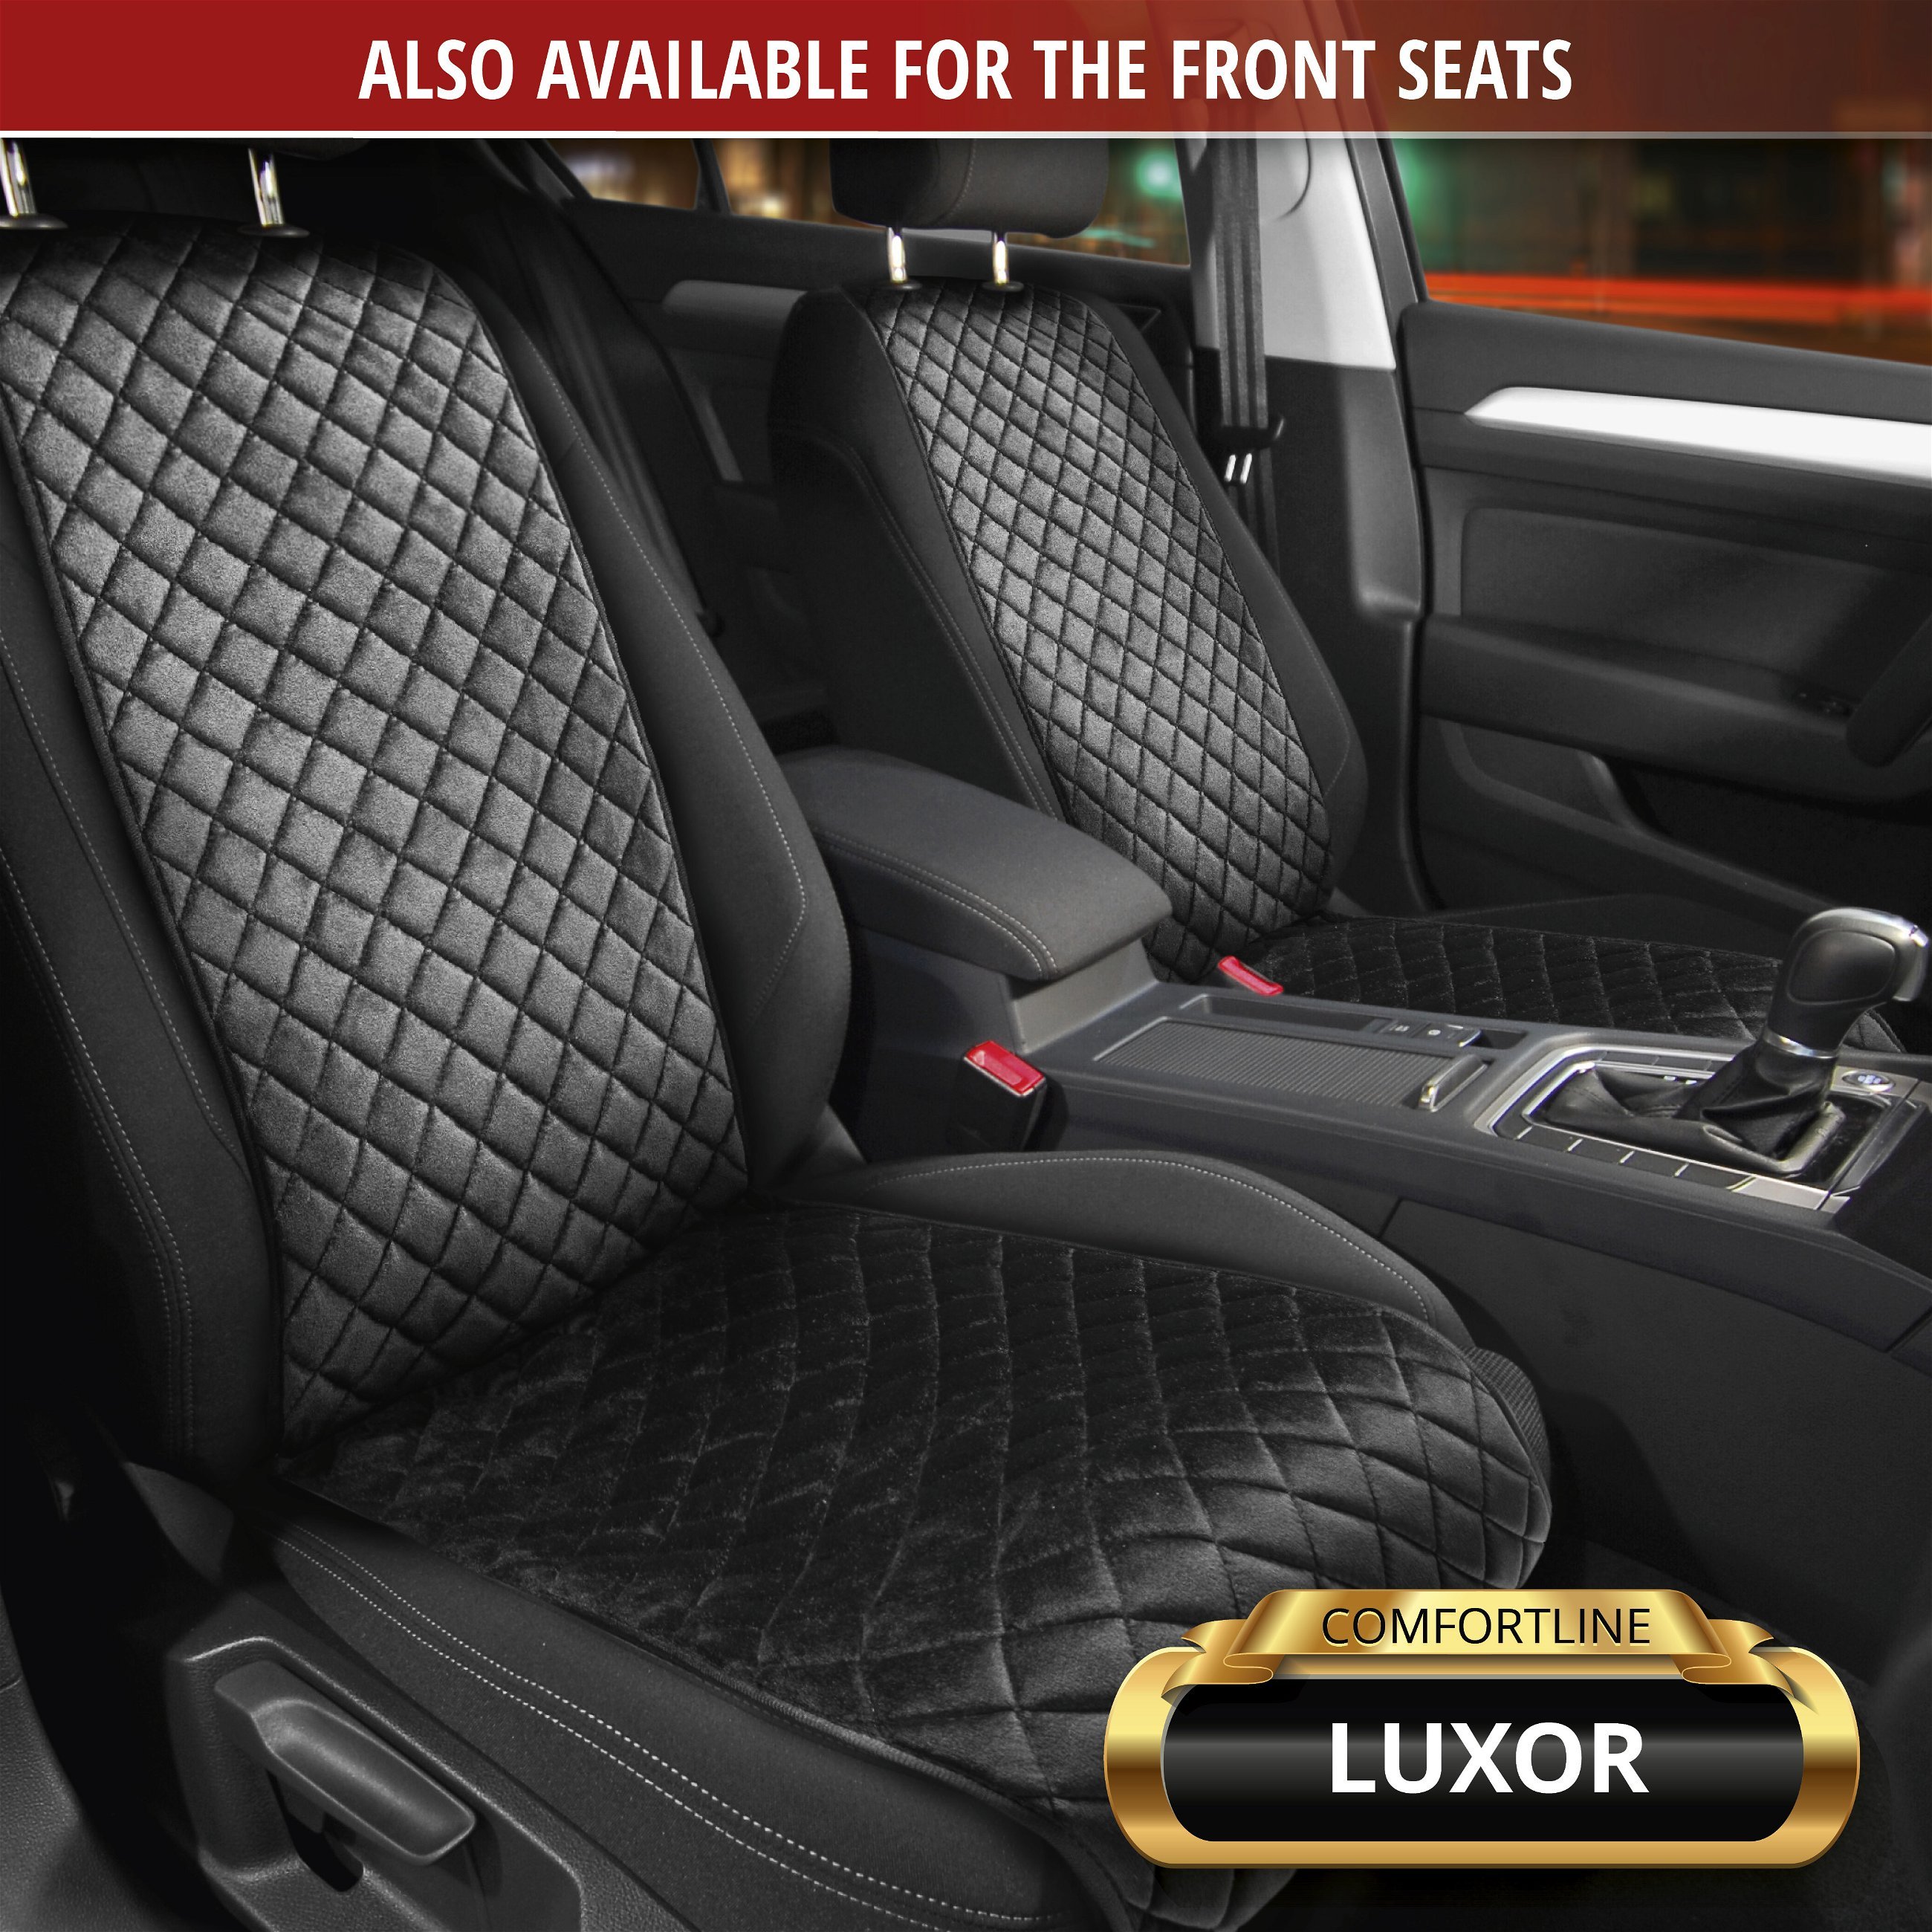 Seat cover Comfortline Luxor with anti-slip coating, 1 rear seat cover